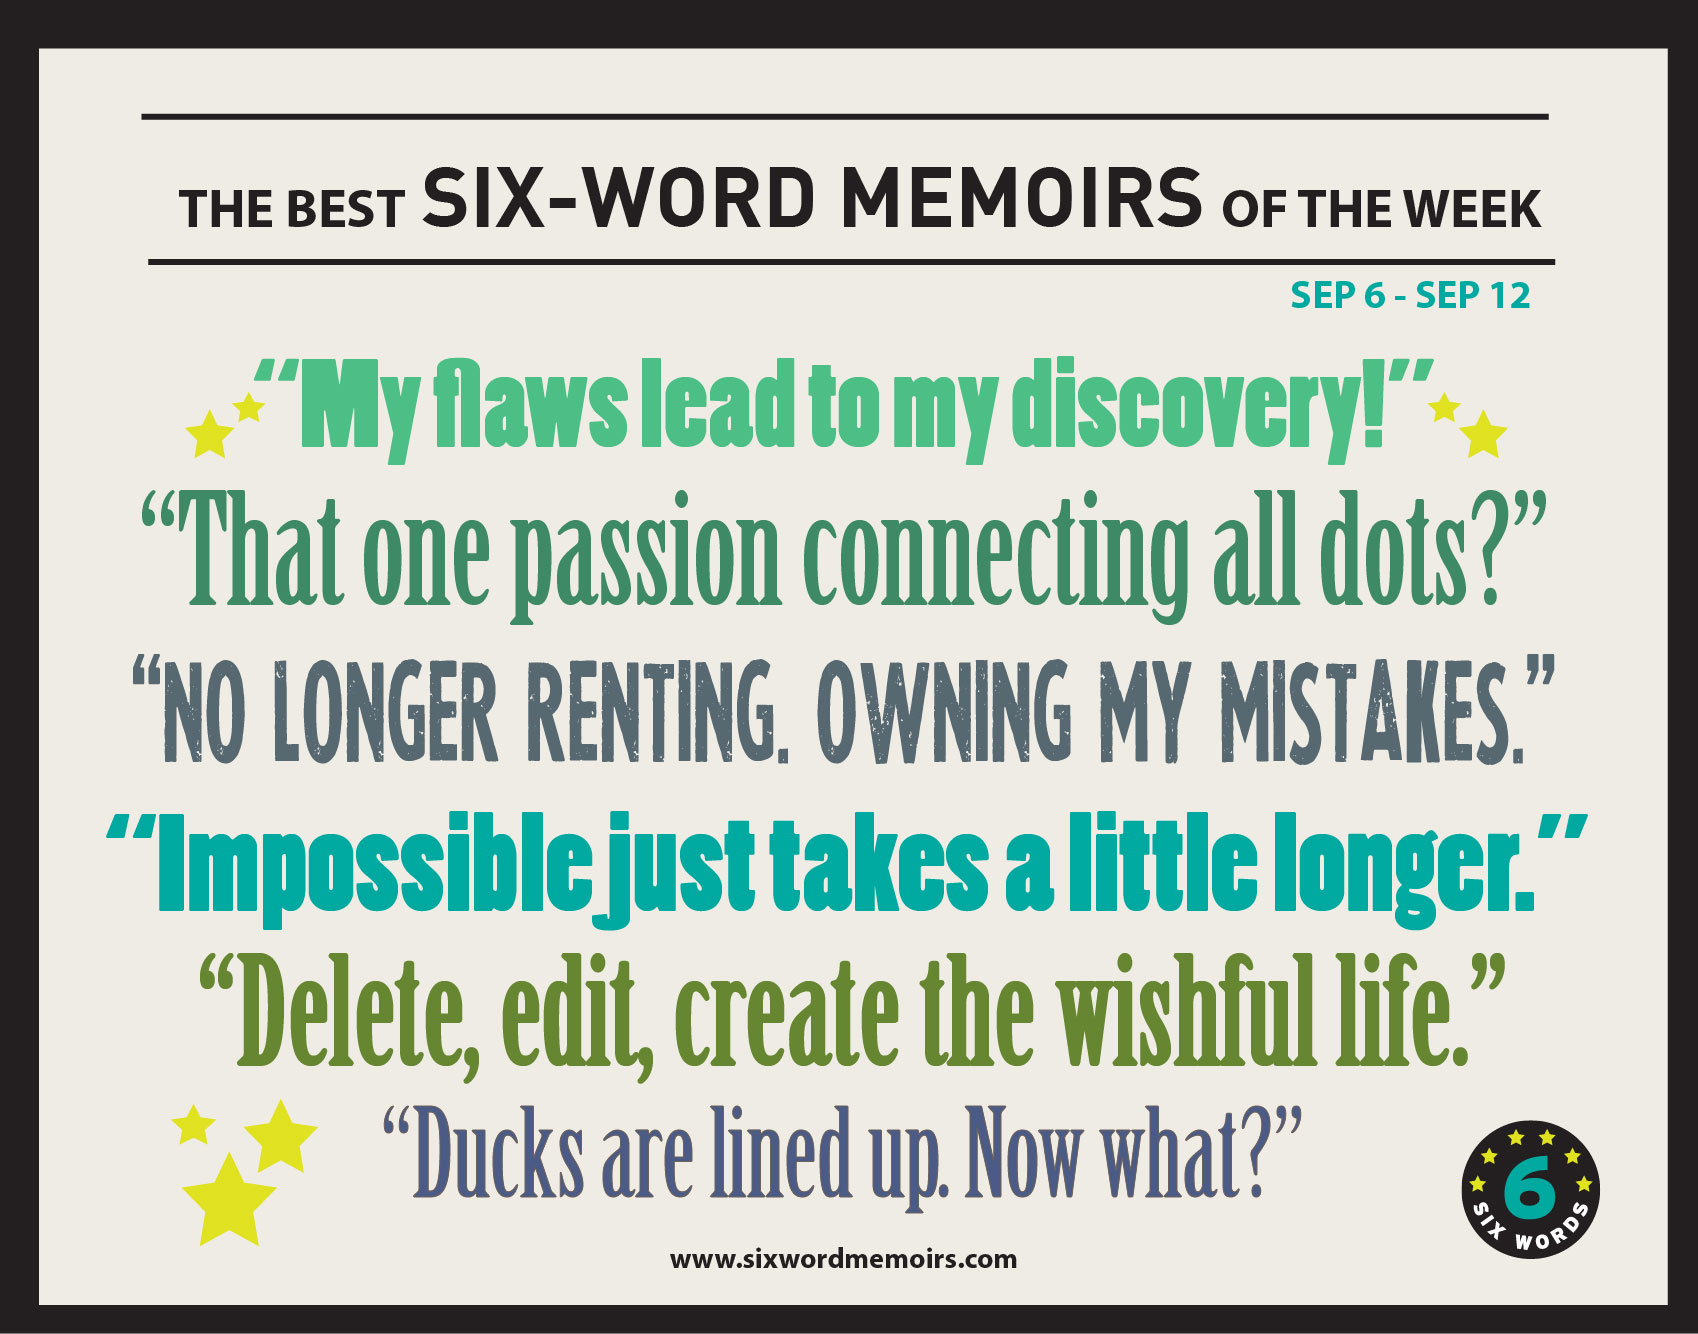 Impossible Just Takes a Little Longer.” The Best Six-Word Memoirs